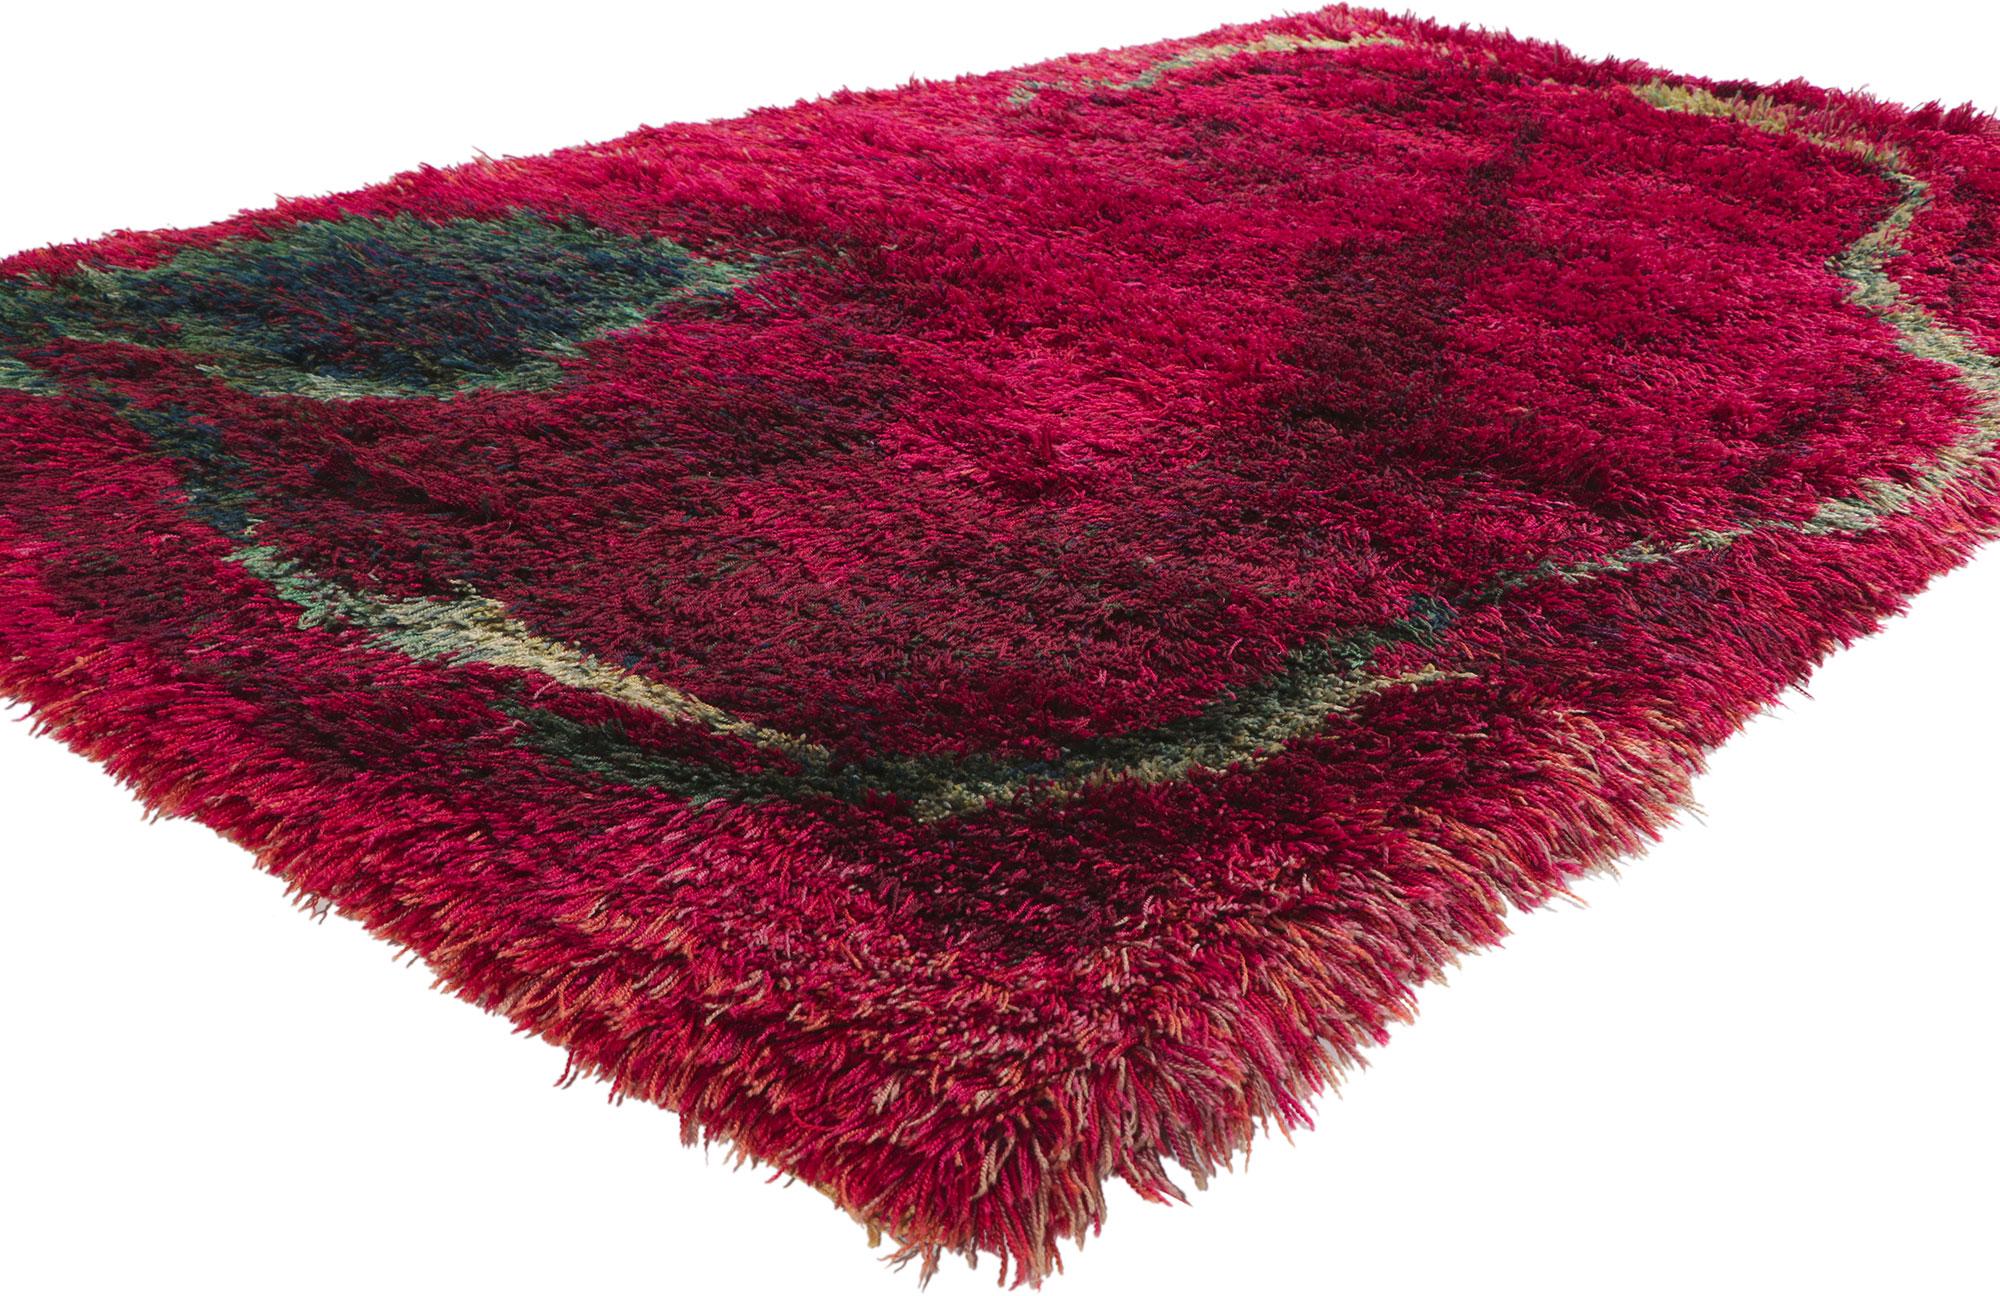 78474 Vintage Swedish Rya Rug, 04'10 x 07'09.

Designed by Viola Grasten.
Abrash.
Hand knotted wool.
Made in Sweden.
Measures: 04'10 x 07'09.
Date: 1960s to 1970s. Mid-20th Century.